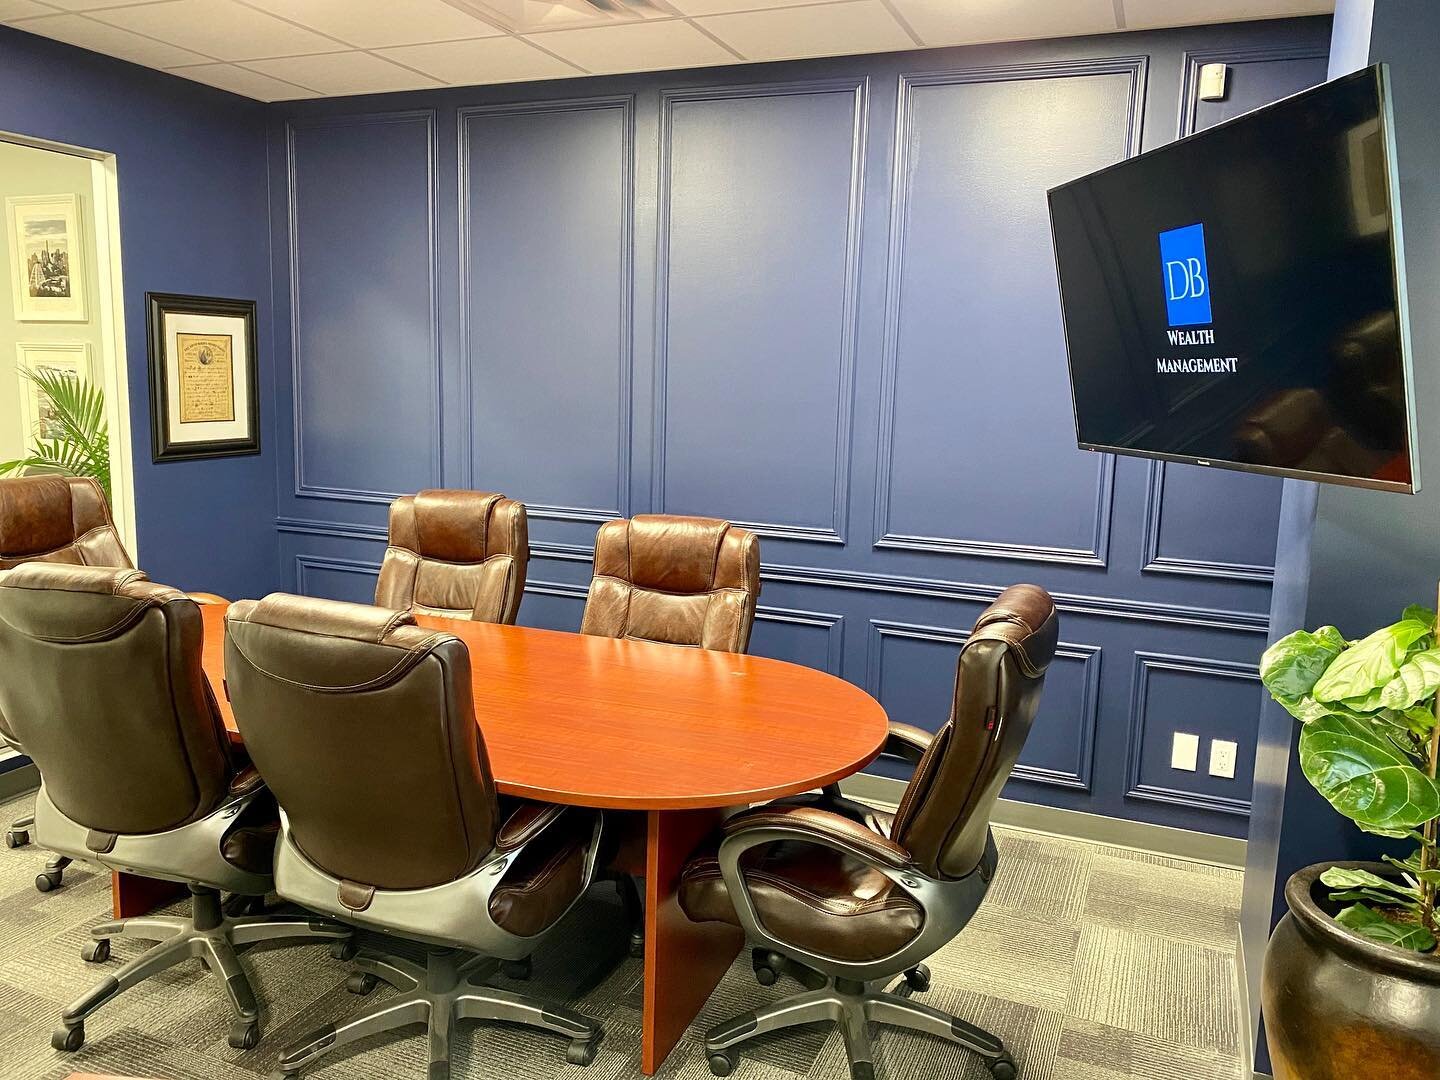 Office renovations are complete and we are ready for appointments in our new boardroom.  #roomwithaview #dbwealthmanagement 
.
.
.
.
.
.
.
#comecheckitout #cfp #certifiedfinancialplanner #openforbusiness #newdigs #greatview #t8n #stalbert #stalbertli